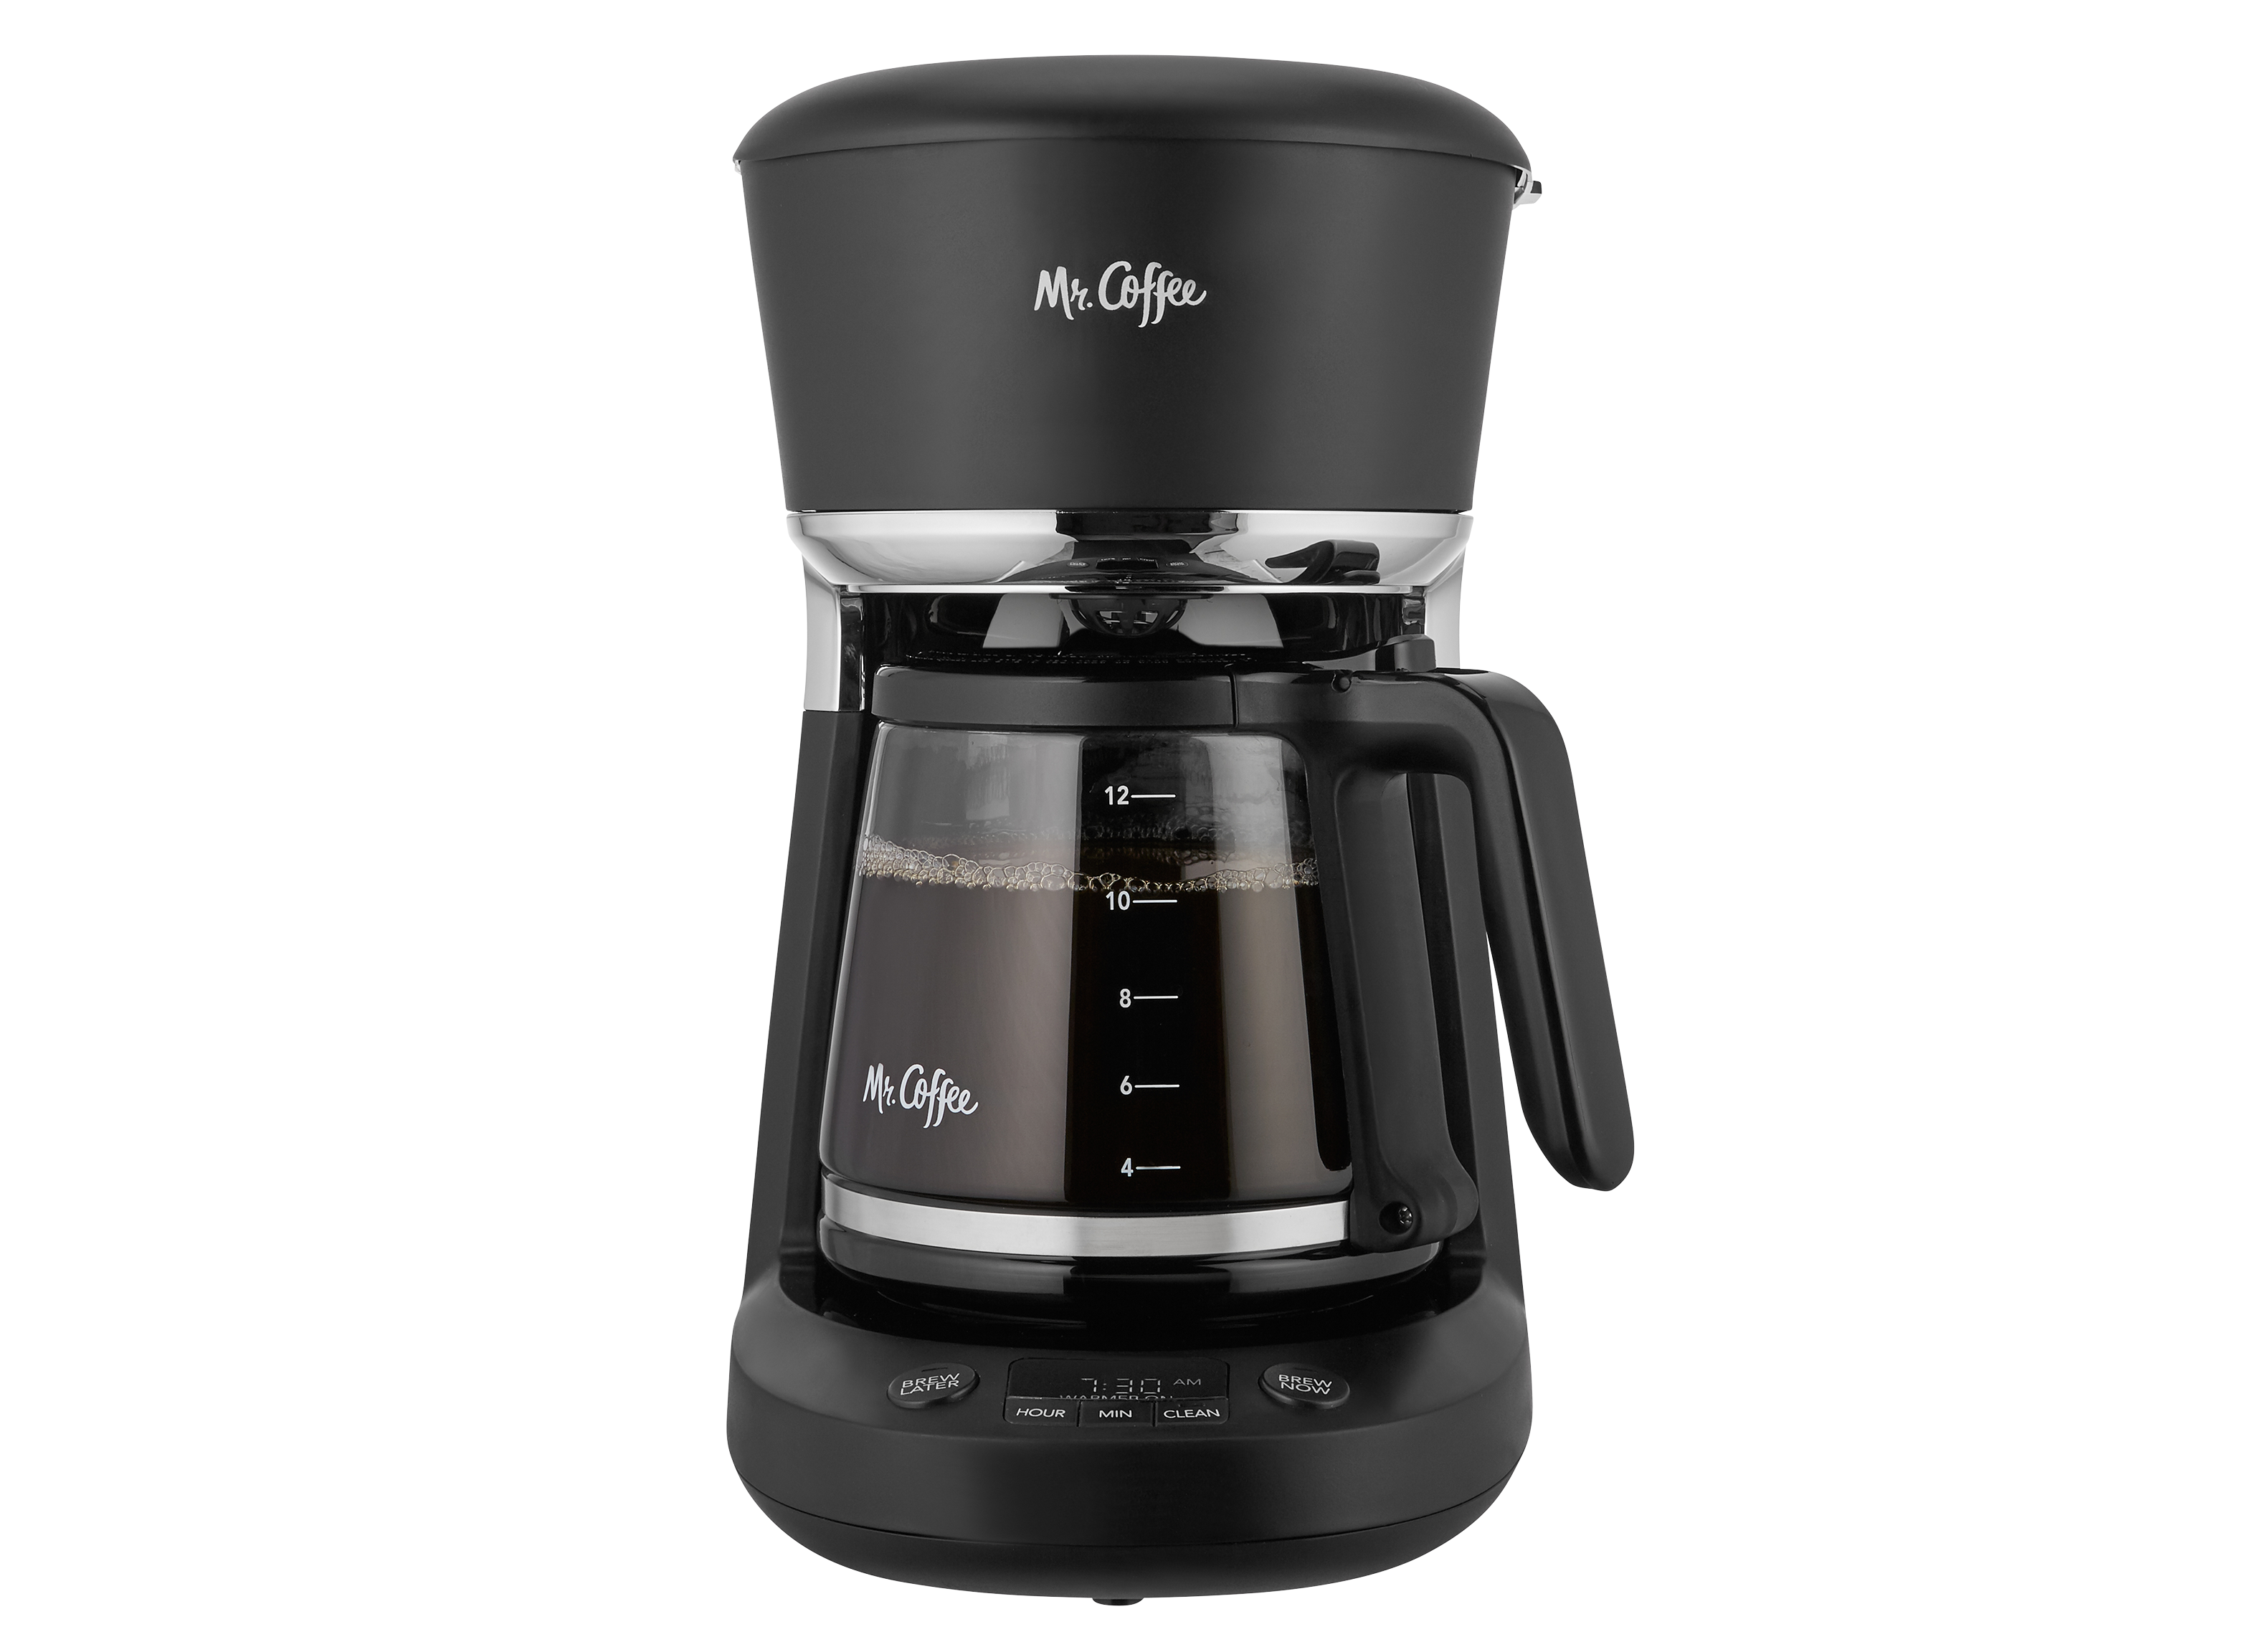 https://crdms.images.consumerreports.org/prod/products/cr/models/400769-drip-coffee-makers-with-carafe-mr-coffee-programmable-with-advanced-water-filtration-bvmc-lmx120-10011099.png